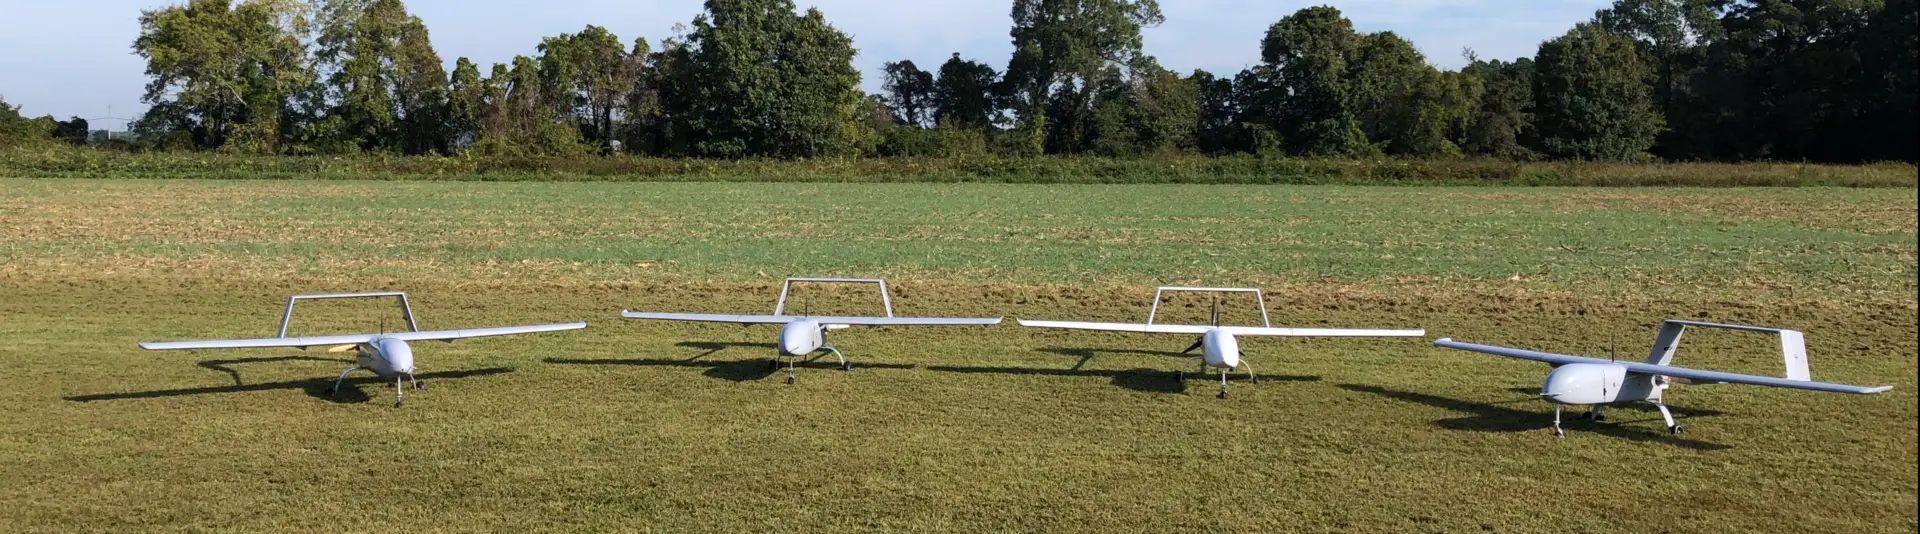 four small airplanes on grass